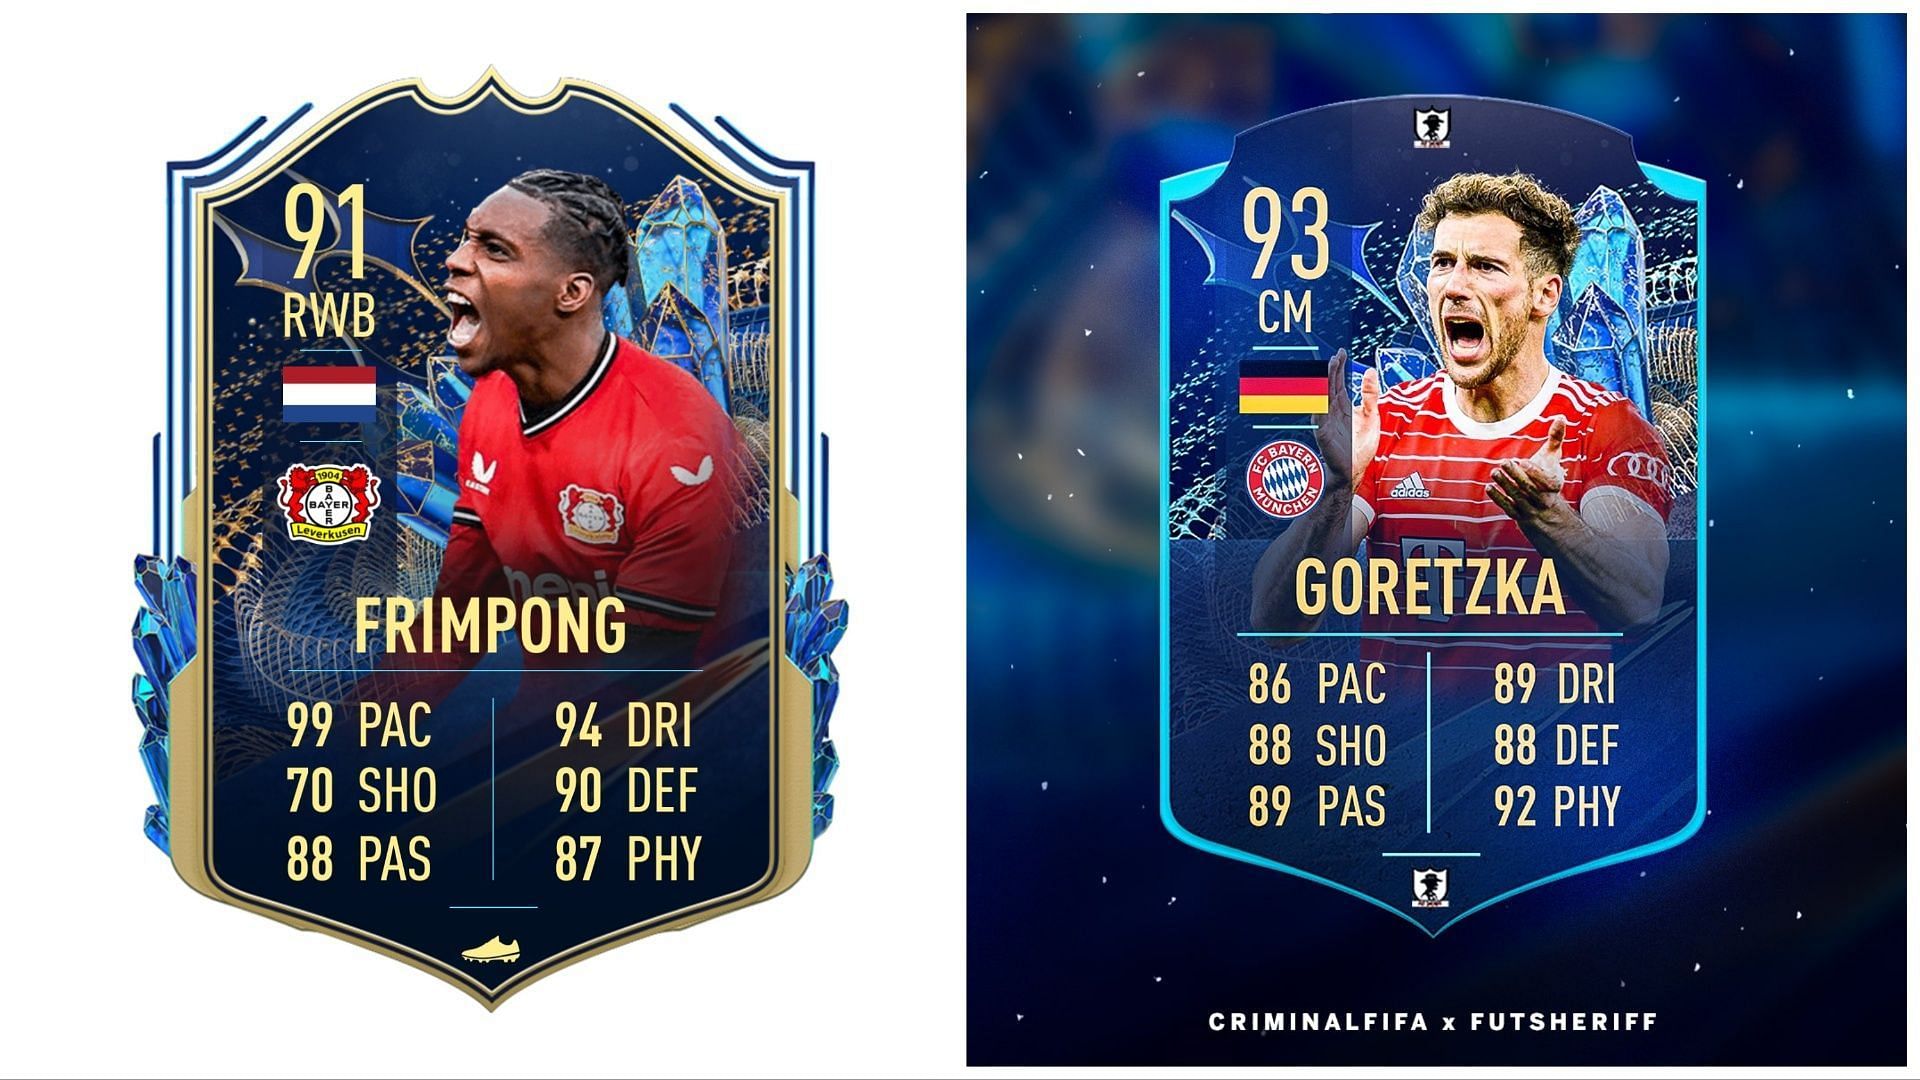 TOTS Frimpong and TOTS Moments Goretzka have been leaked (Images via Twitter/FIFA23Leaked_ and Twitter/FUT Sheriff)